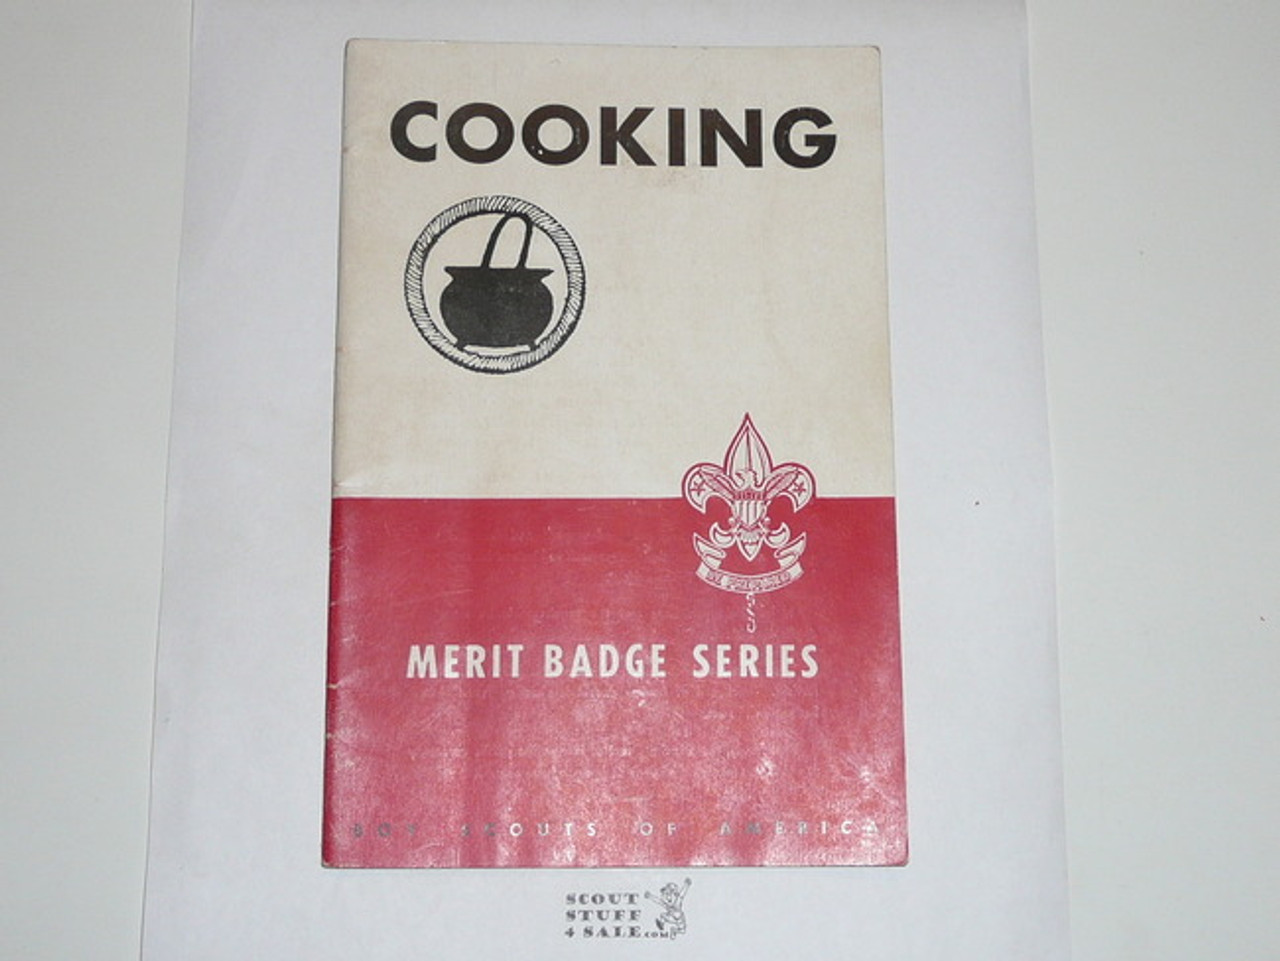 Cooking Merit Badge Pamphlet, Type 5, Red/Wht Cover, 9-45 Printing